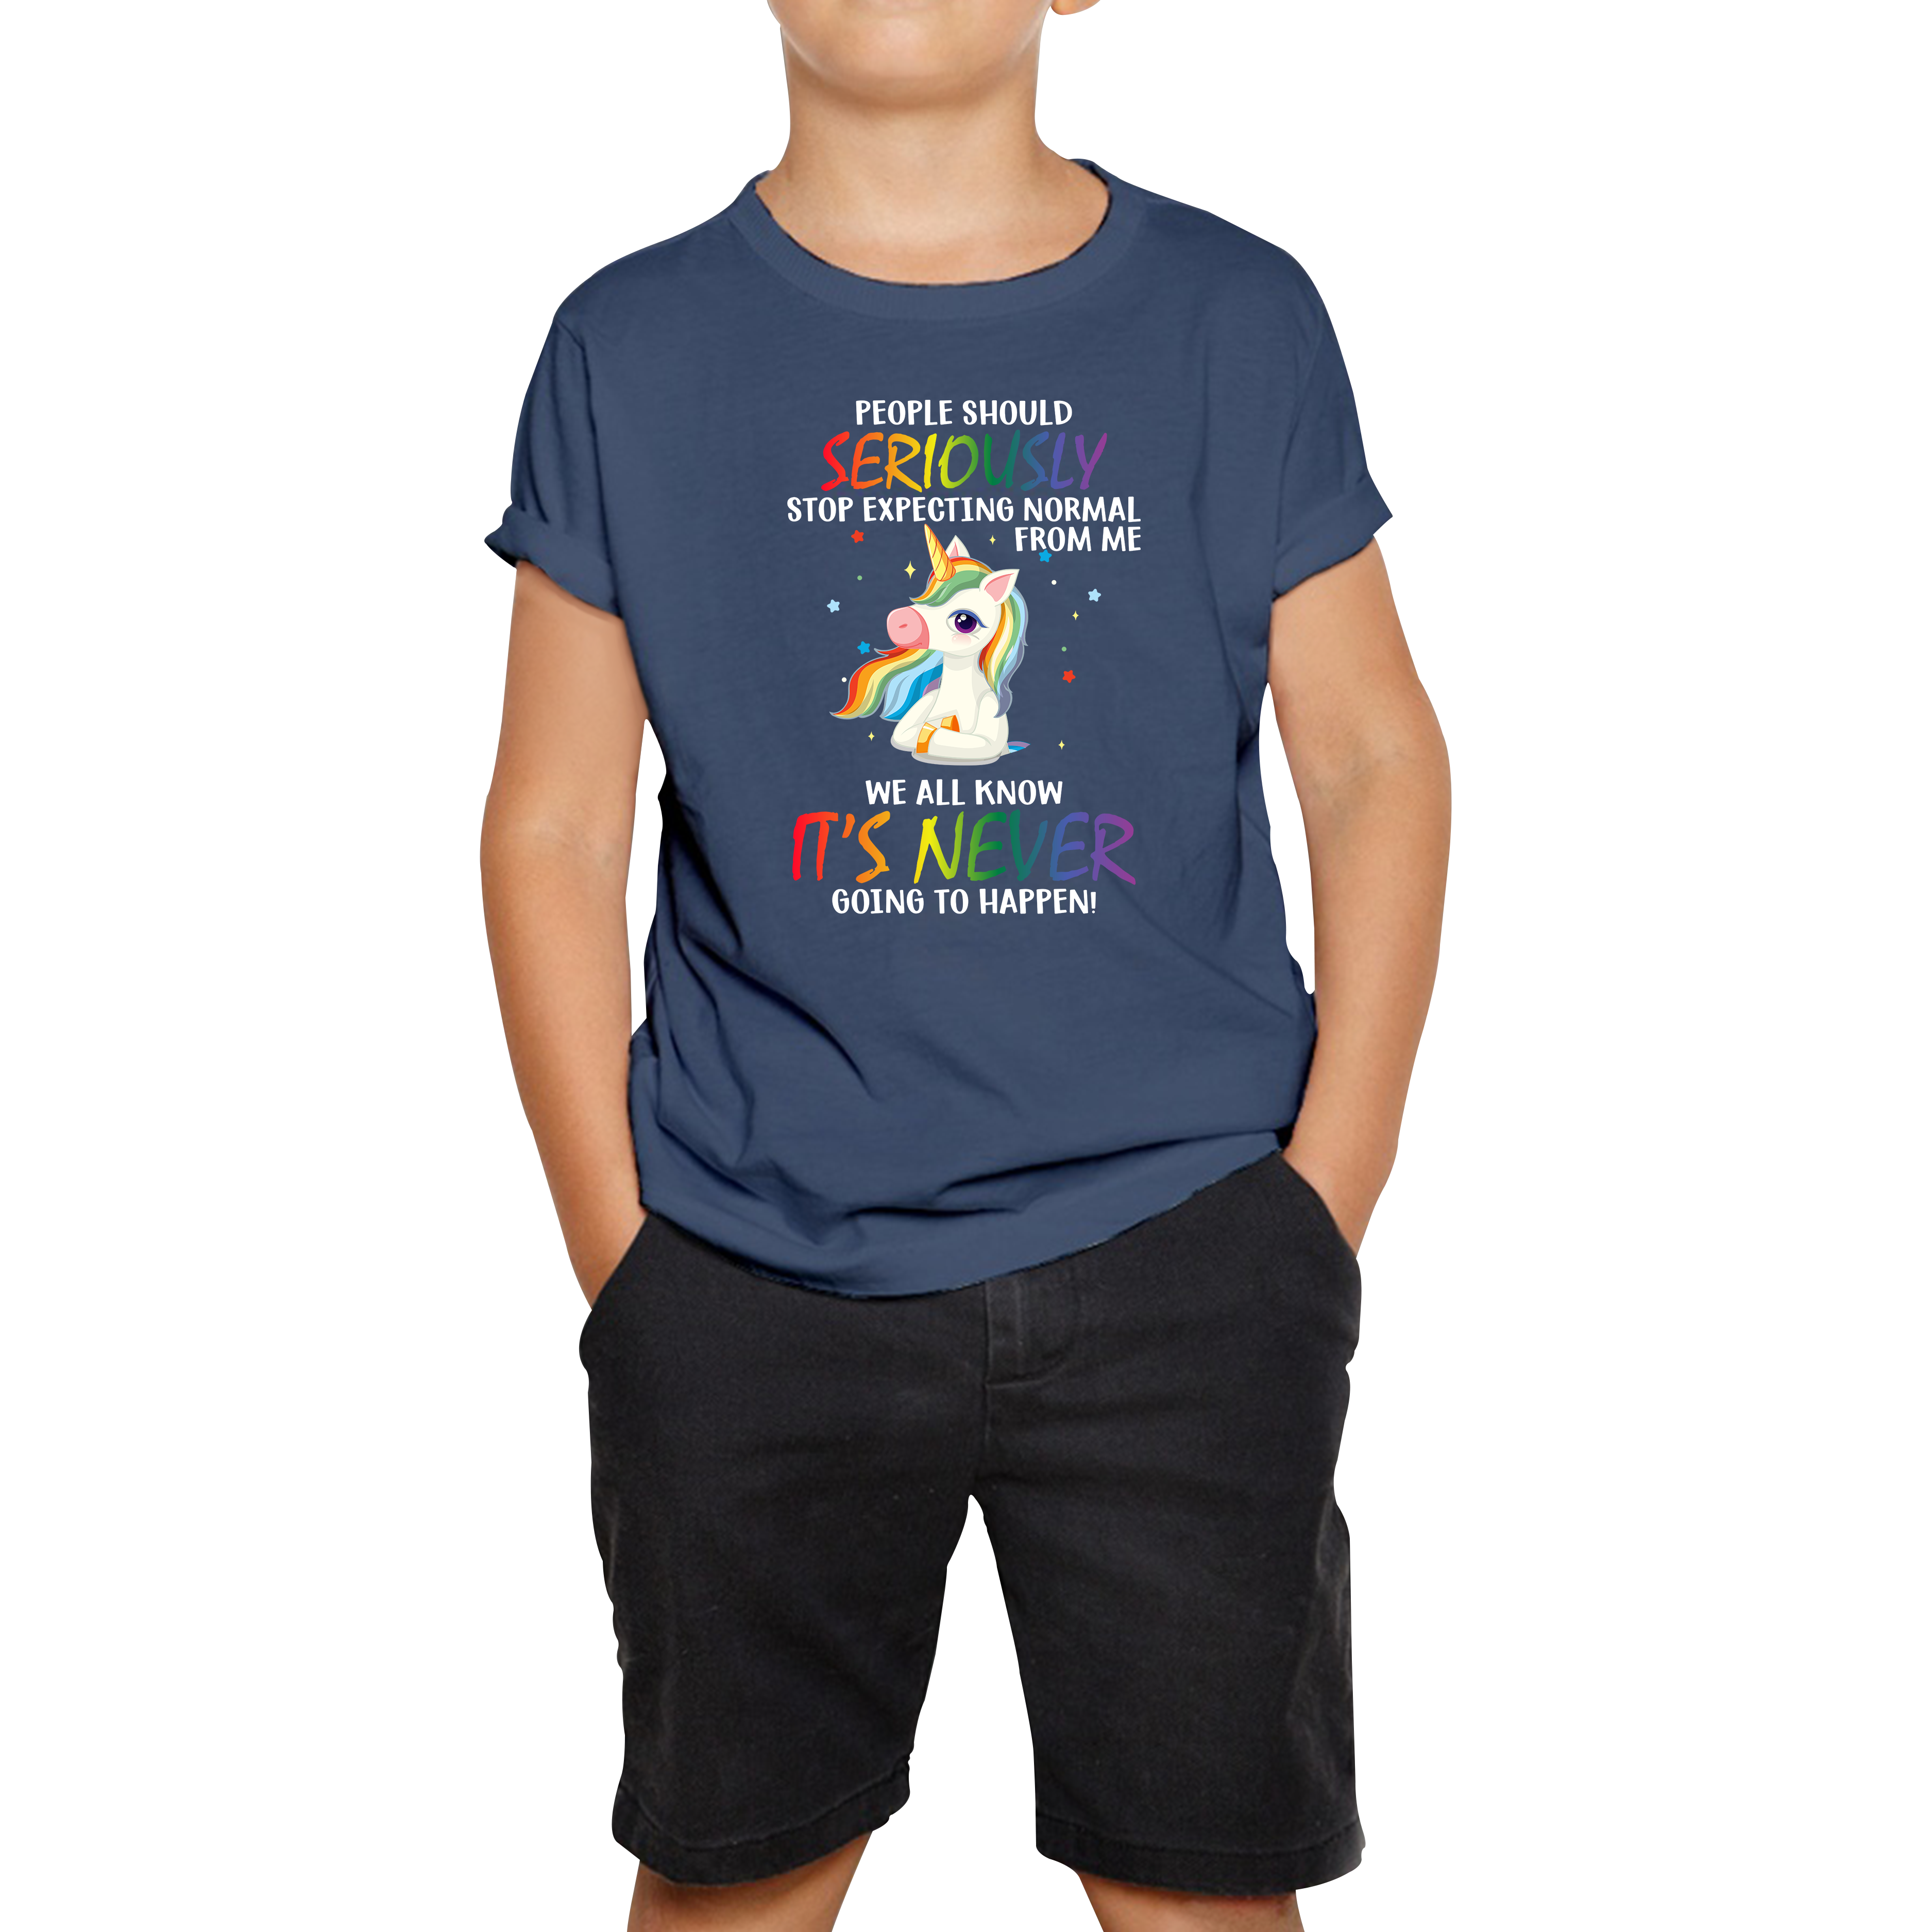 People Should Seriously Stop Expecting Normal From Me Unicorn Horse T-shirt Funny Sarcastic Joke Kids Tee